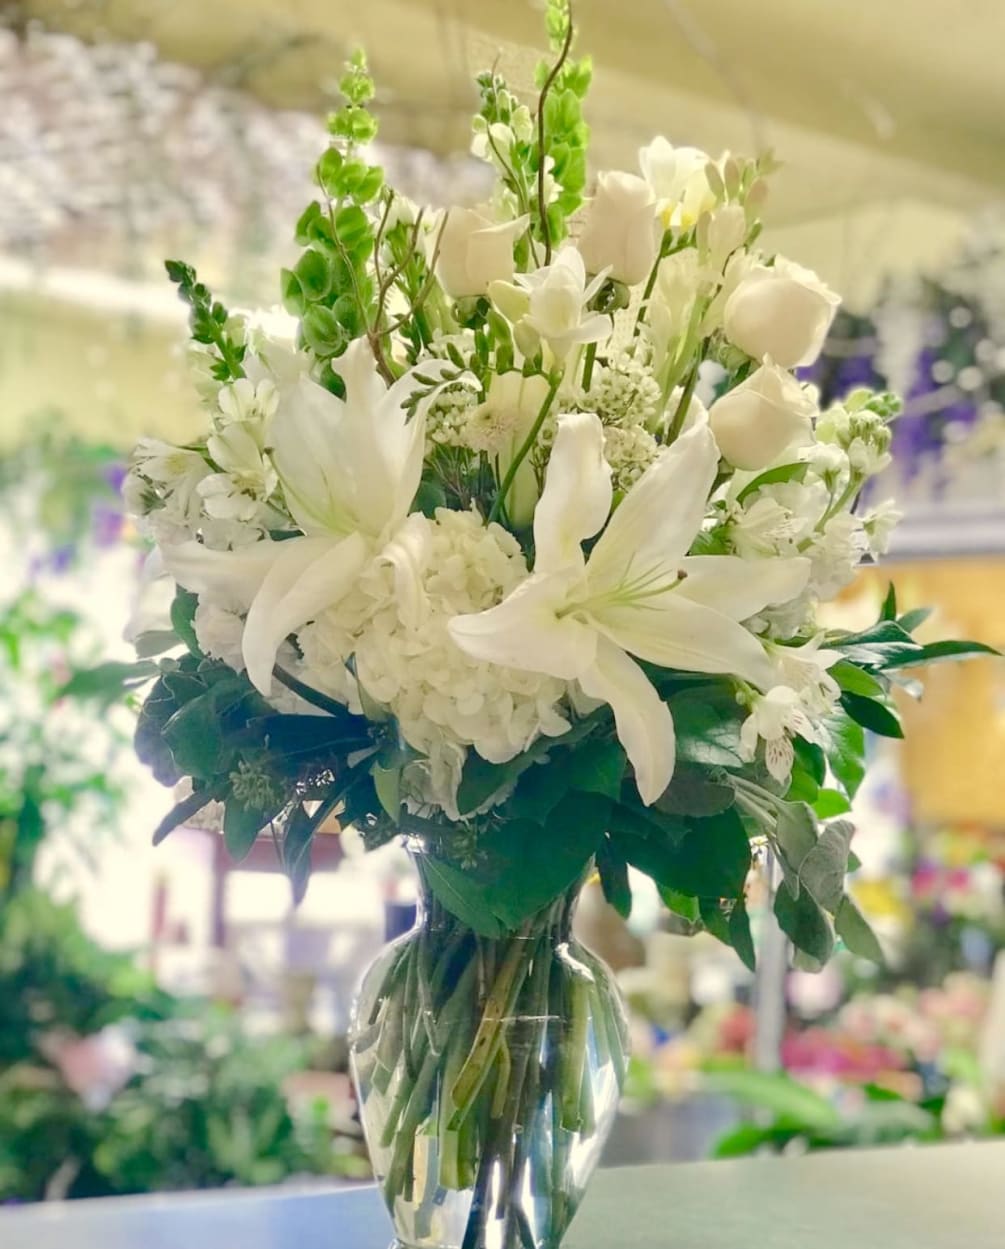 An all white arrangement with premium flowers in a clear glass vase